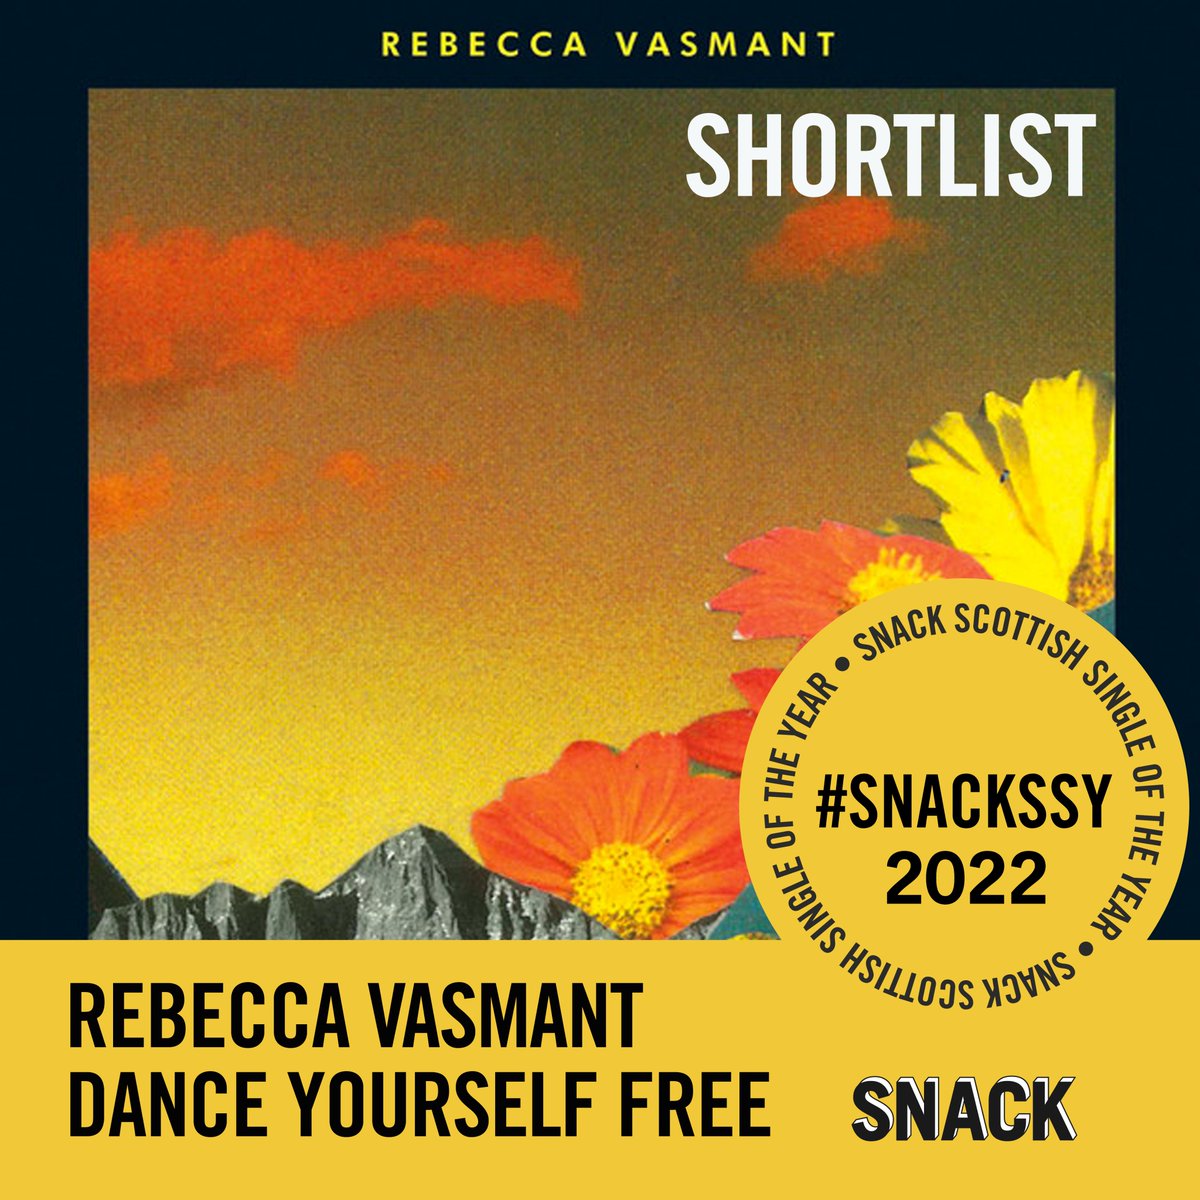 Continuing... 💛SNACKSSY2022💛 SHORTLIST @RebeccaVasmant DANCE YOURSELF FREE If jazz can be a bit insular, Vasmant pulled off the opposite with welcoming and inclusive pretension-free joy. Words @CMQueen youtu.be/Rgm2GBt97eI #SNACKSSY2022